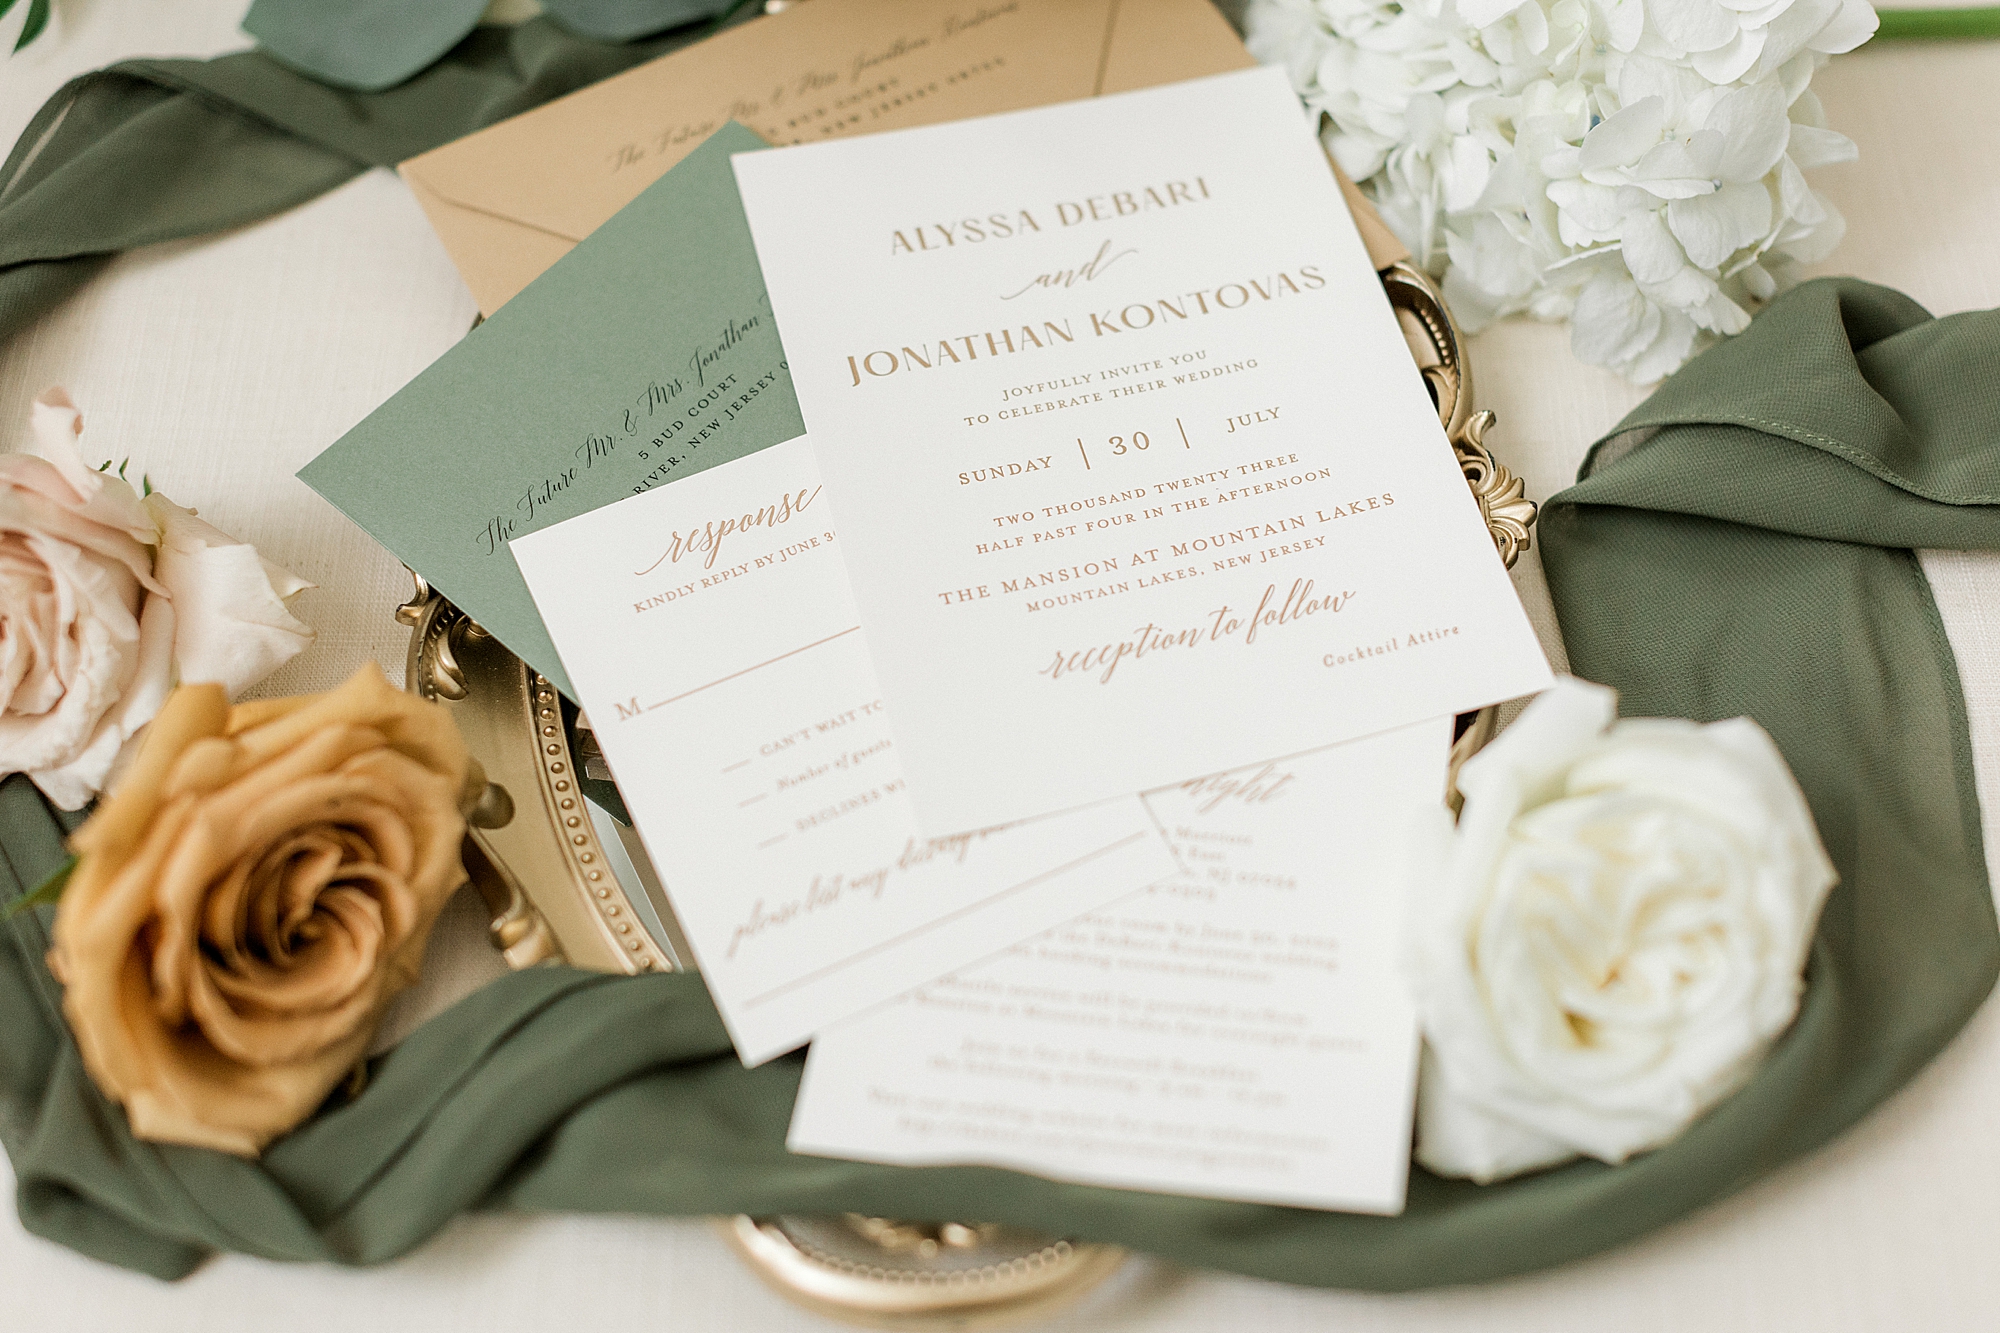 tan and forest green invitation suite lays with white and pale pink roses